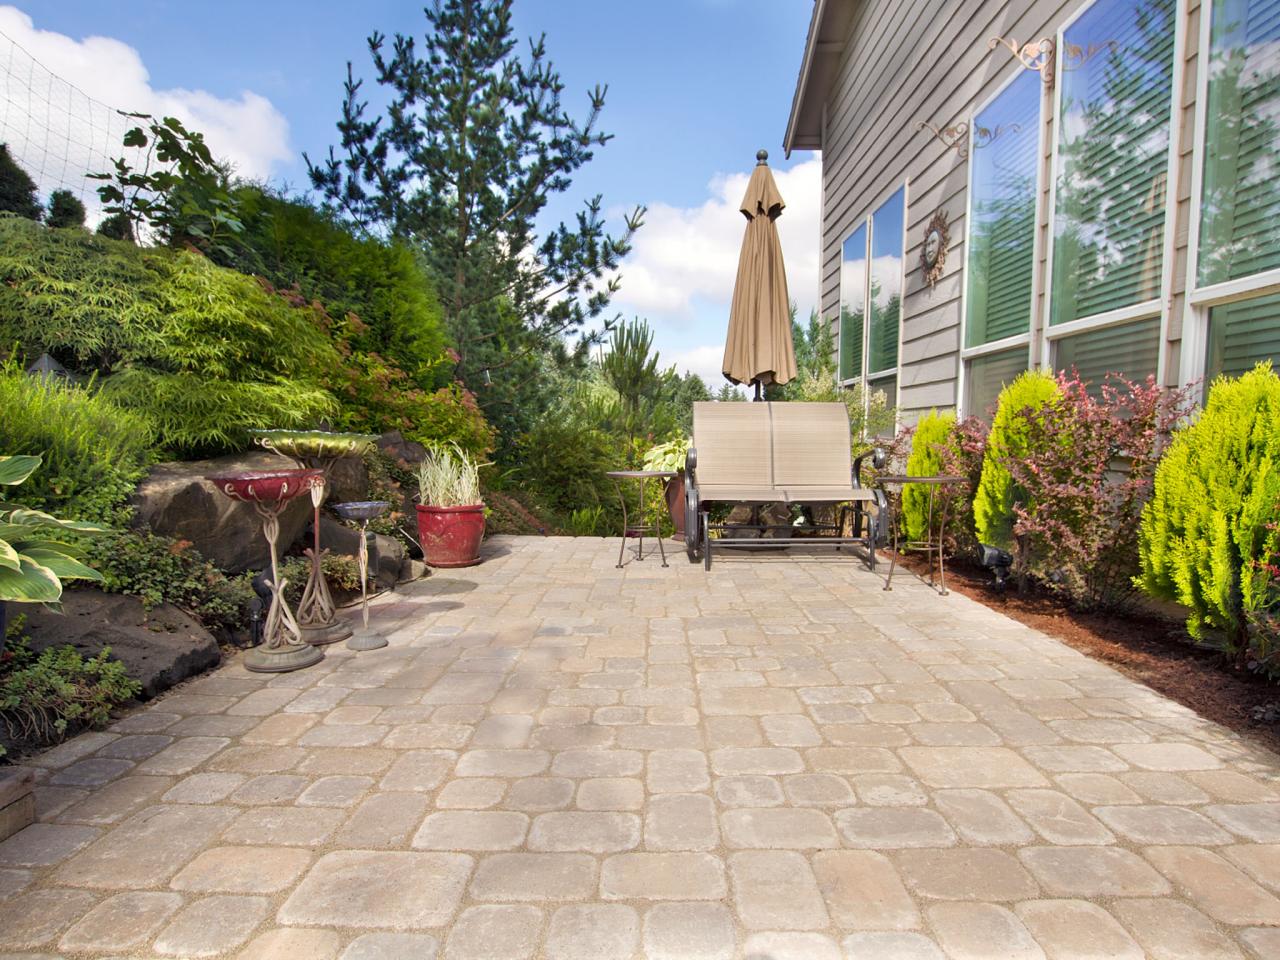 How to Clean a Cement Patio | DIY